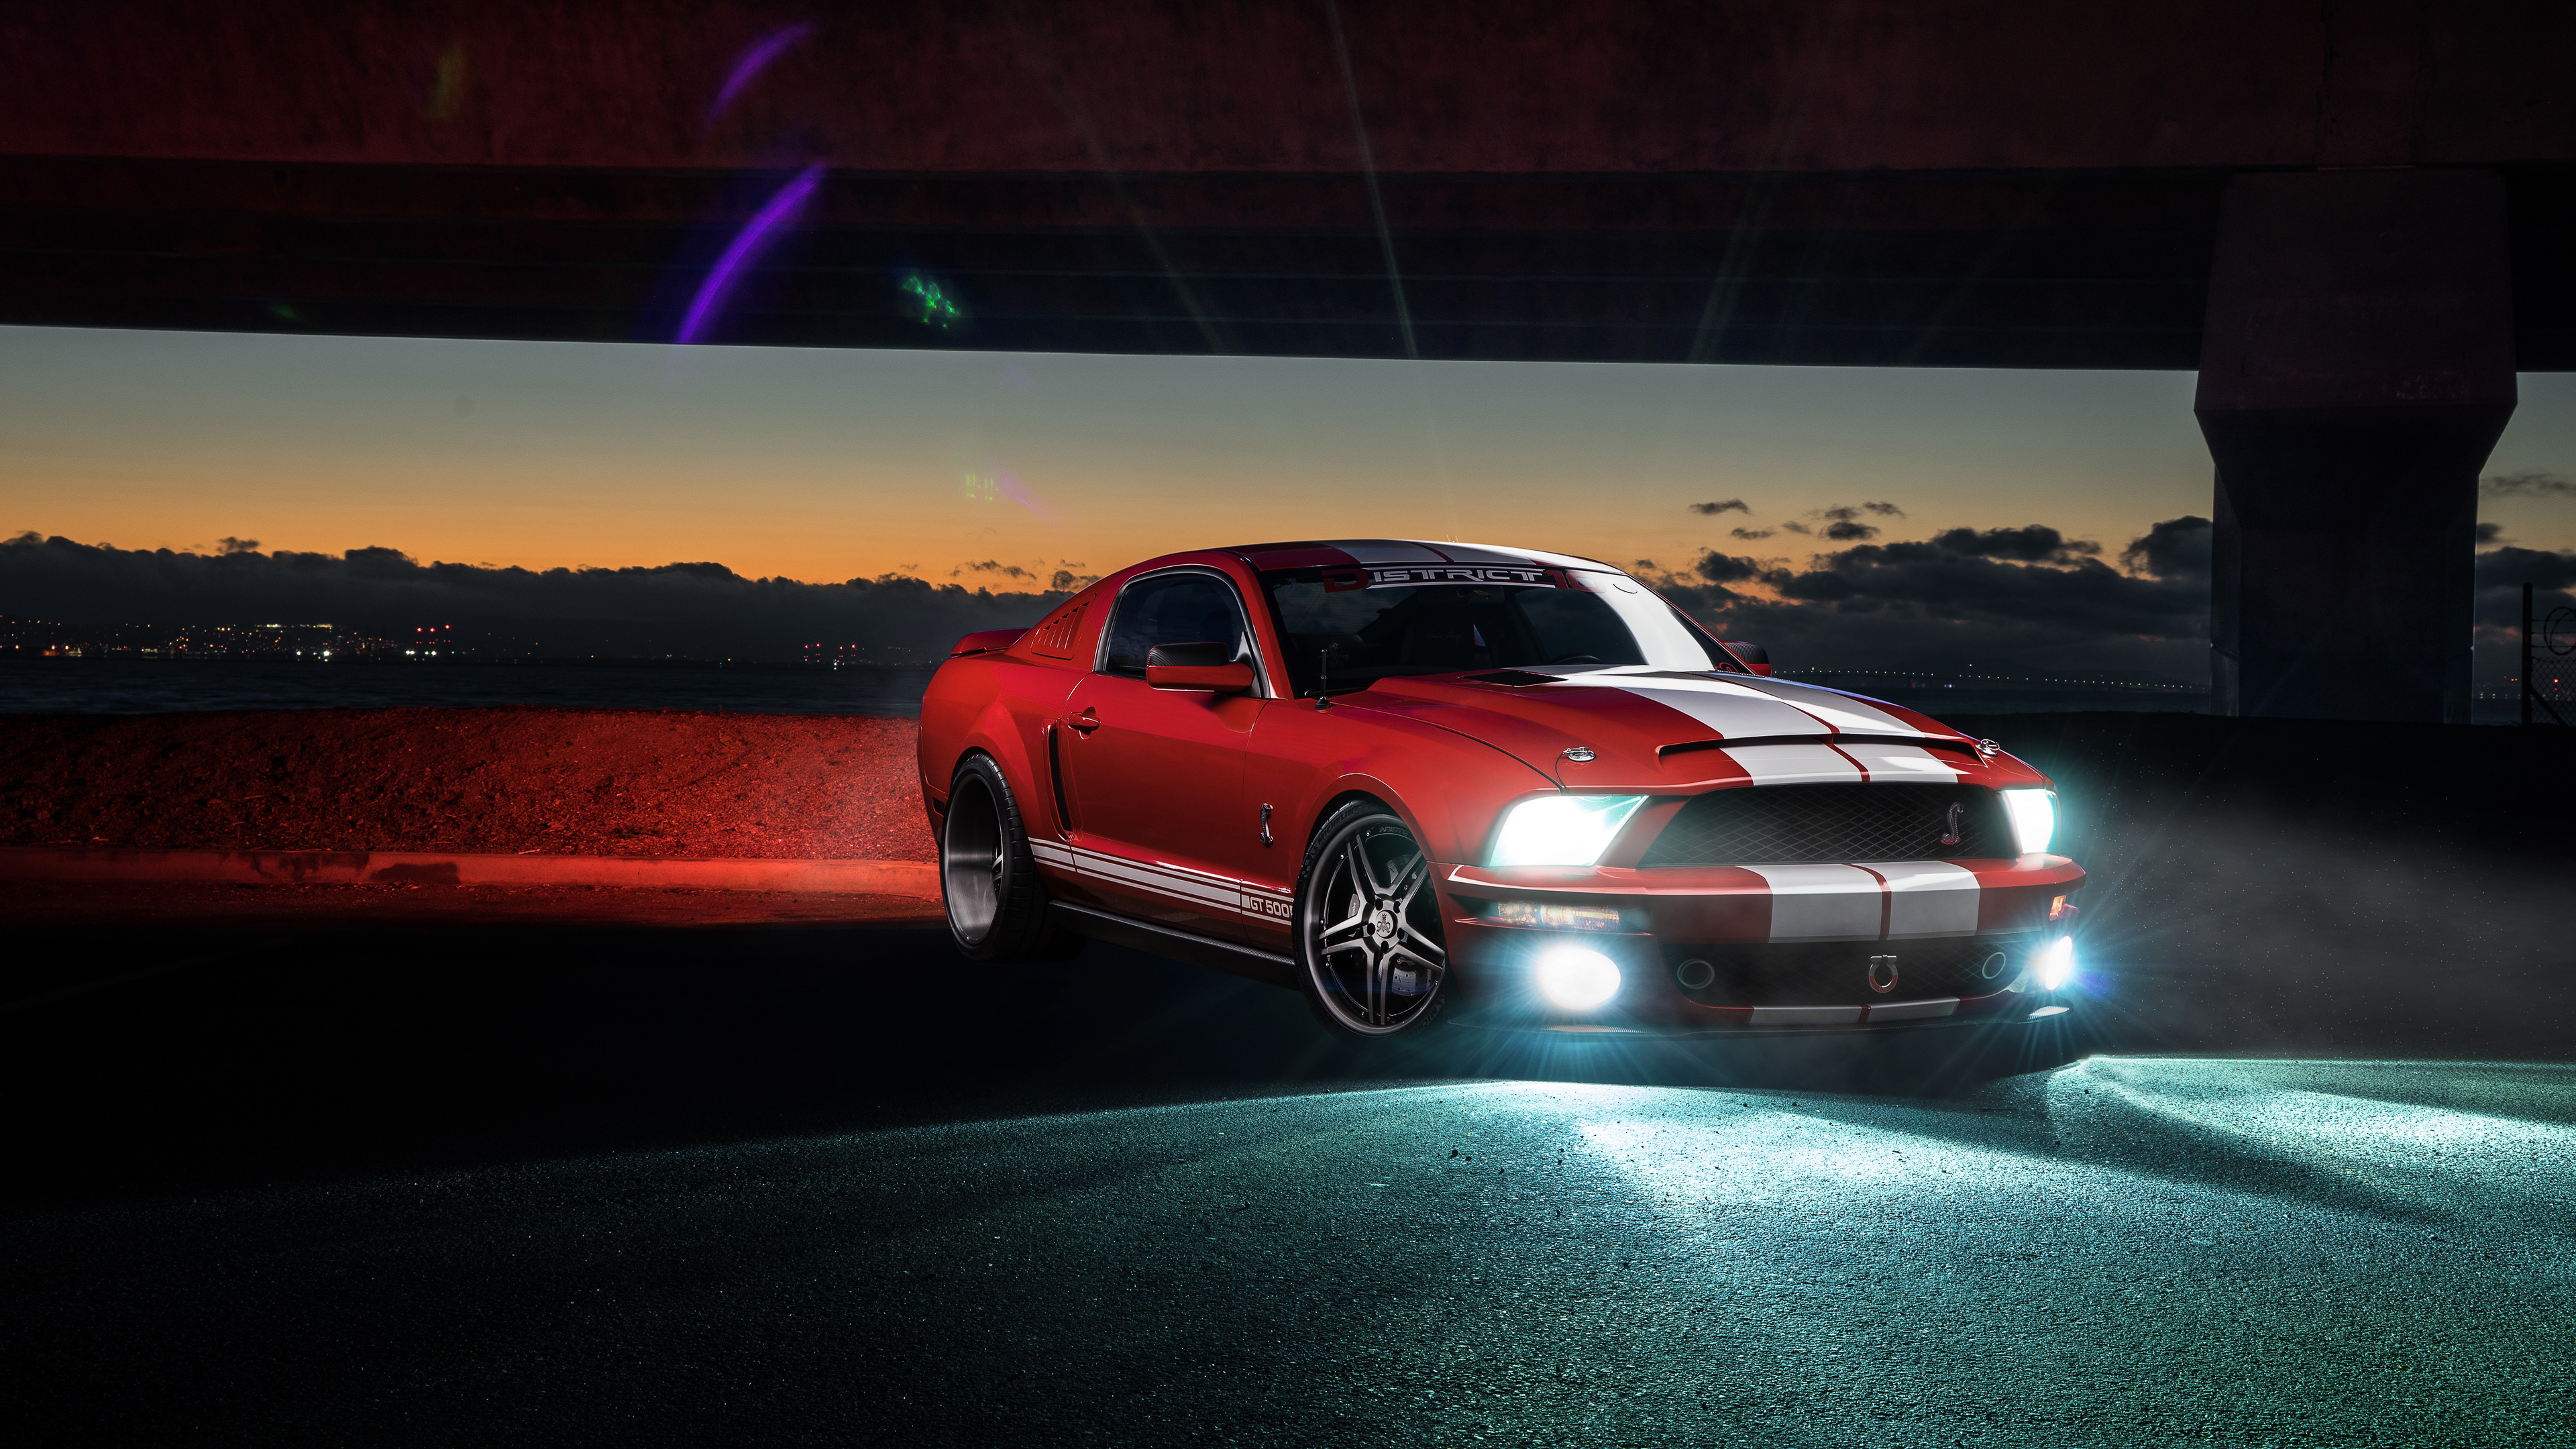 Ford Mustang Shelby GT500 Wallpaper | HD Car Wallpapers ...